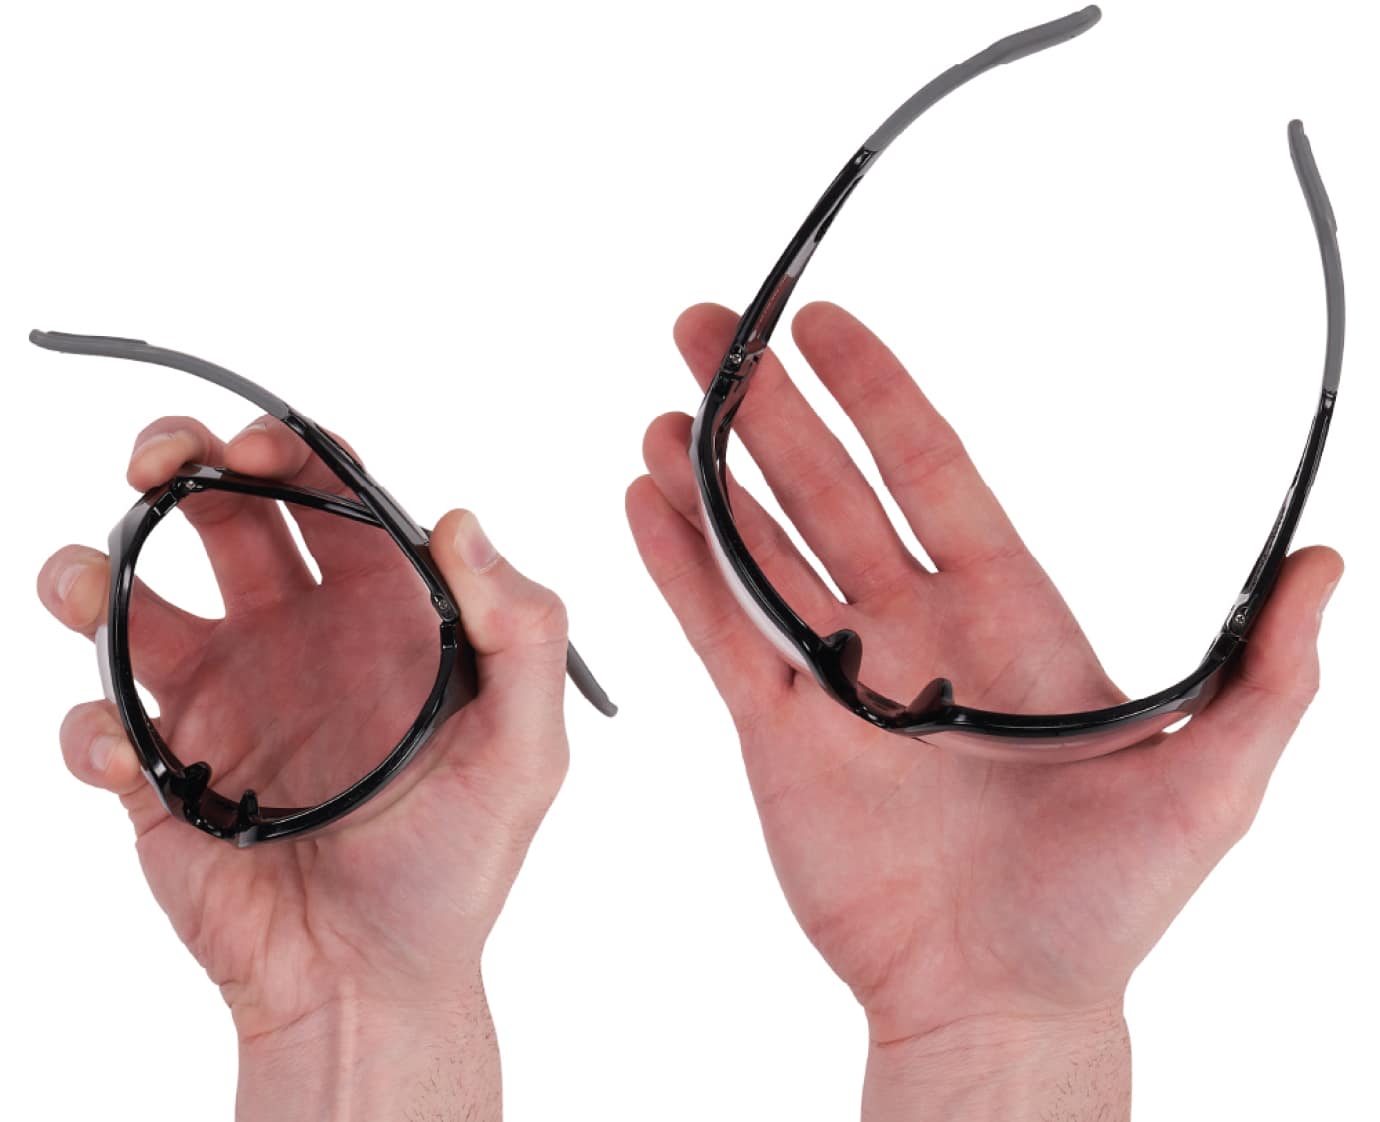 Two hands squeezing a pair of nylon Skullerz Safety Glasses to demonstrate their flexible frames